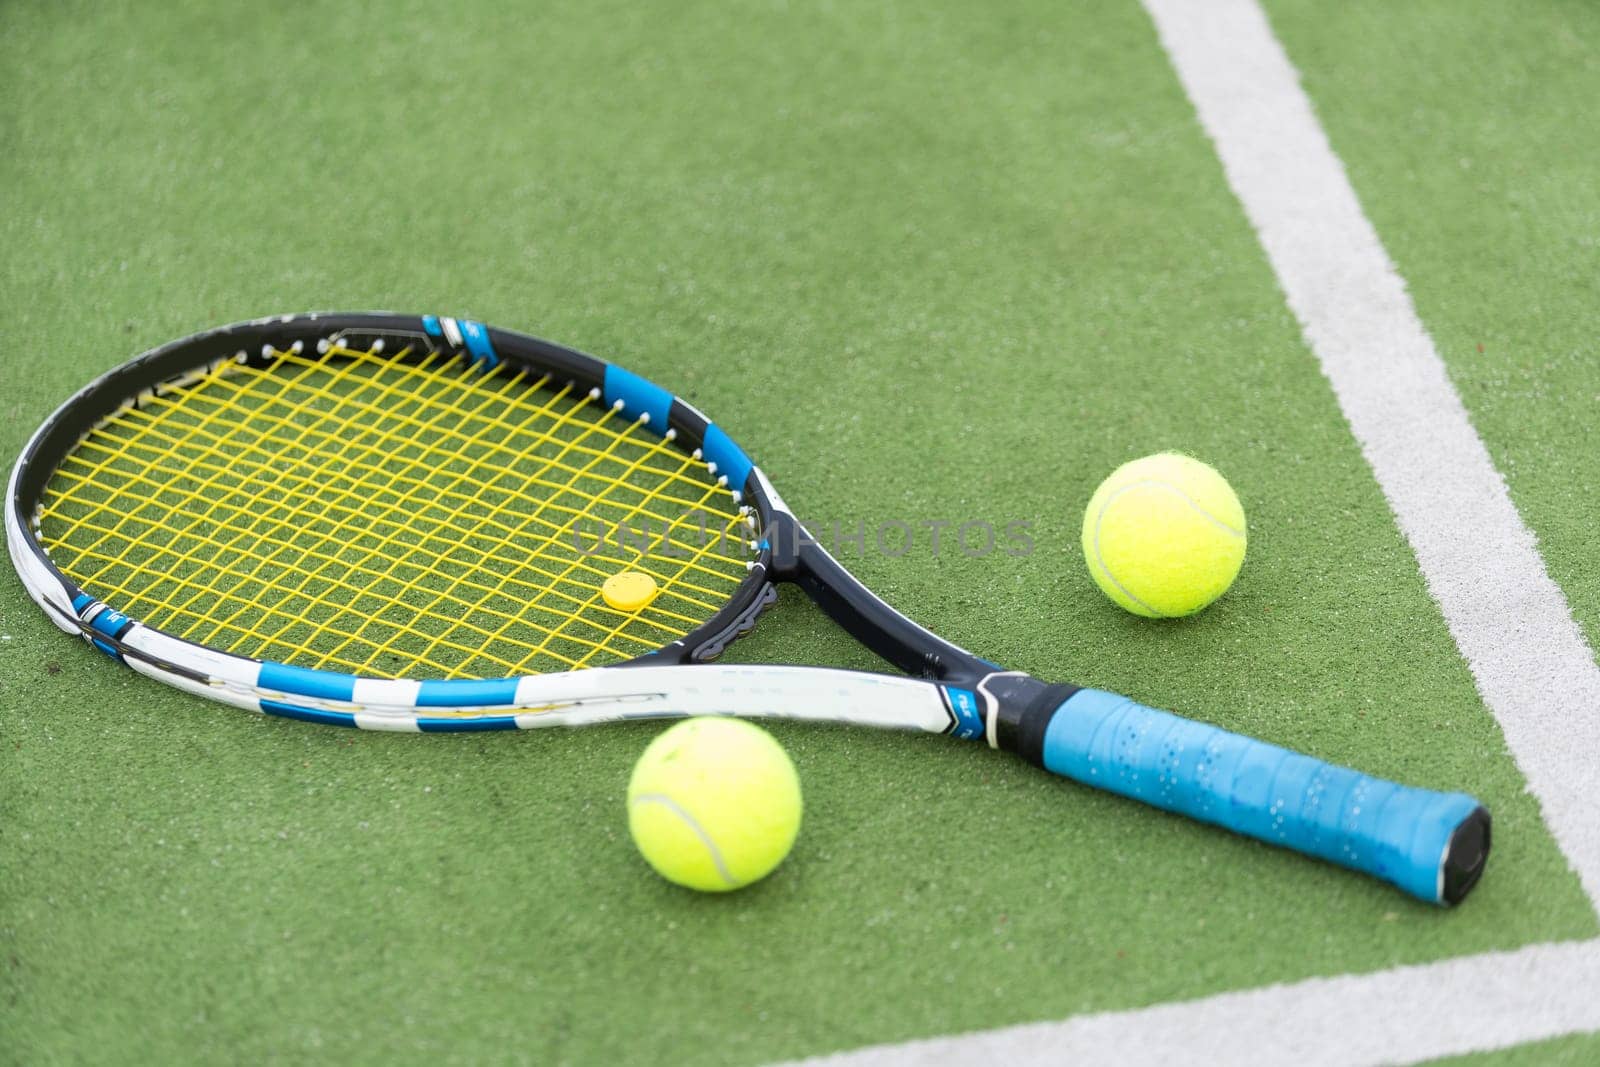 Tennis ball and racket on the ground of sunny outdoor grass tennis court. Summer, healthy lifestyle, sport and hobbies. High quality photo